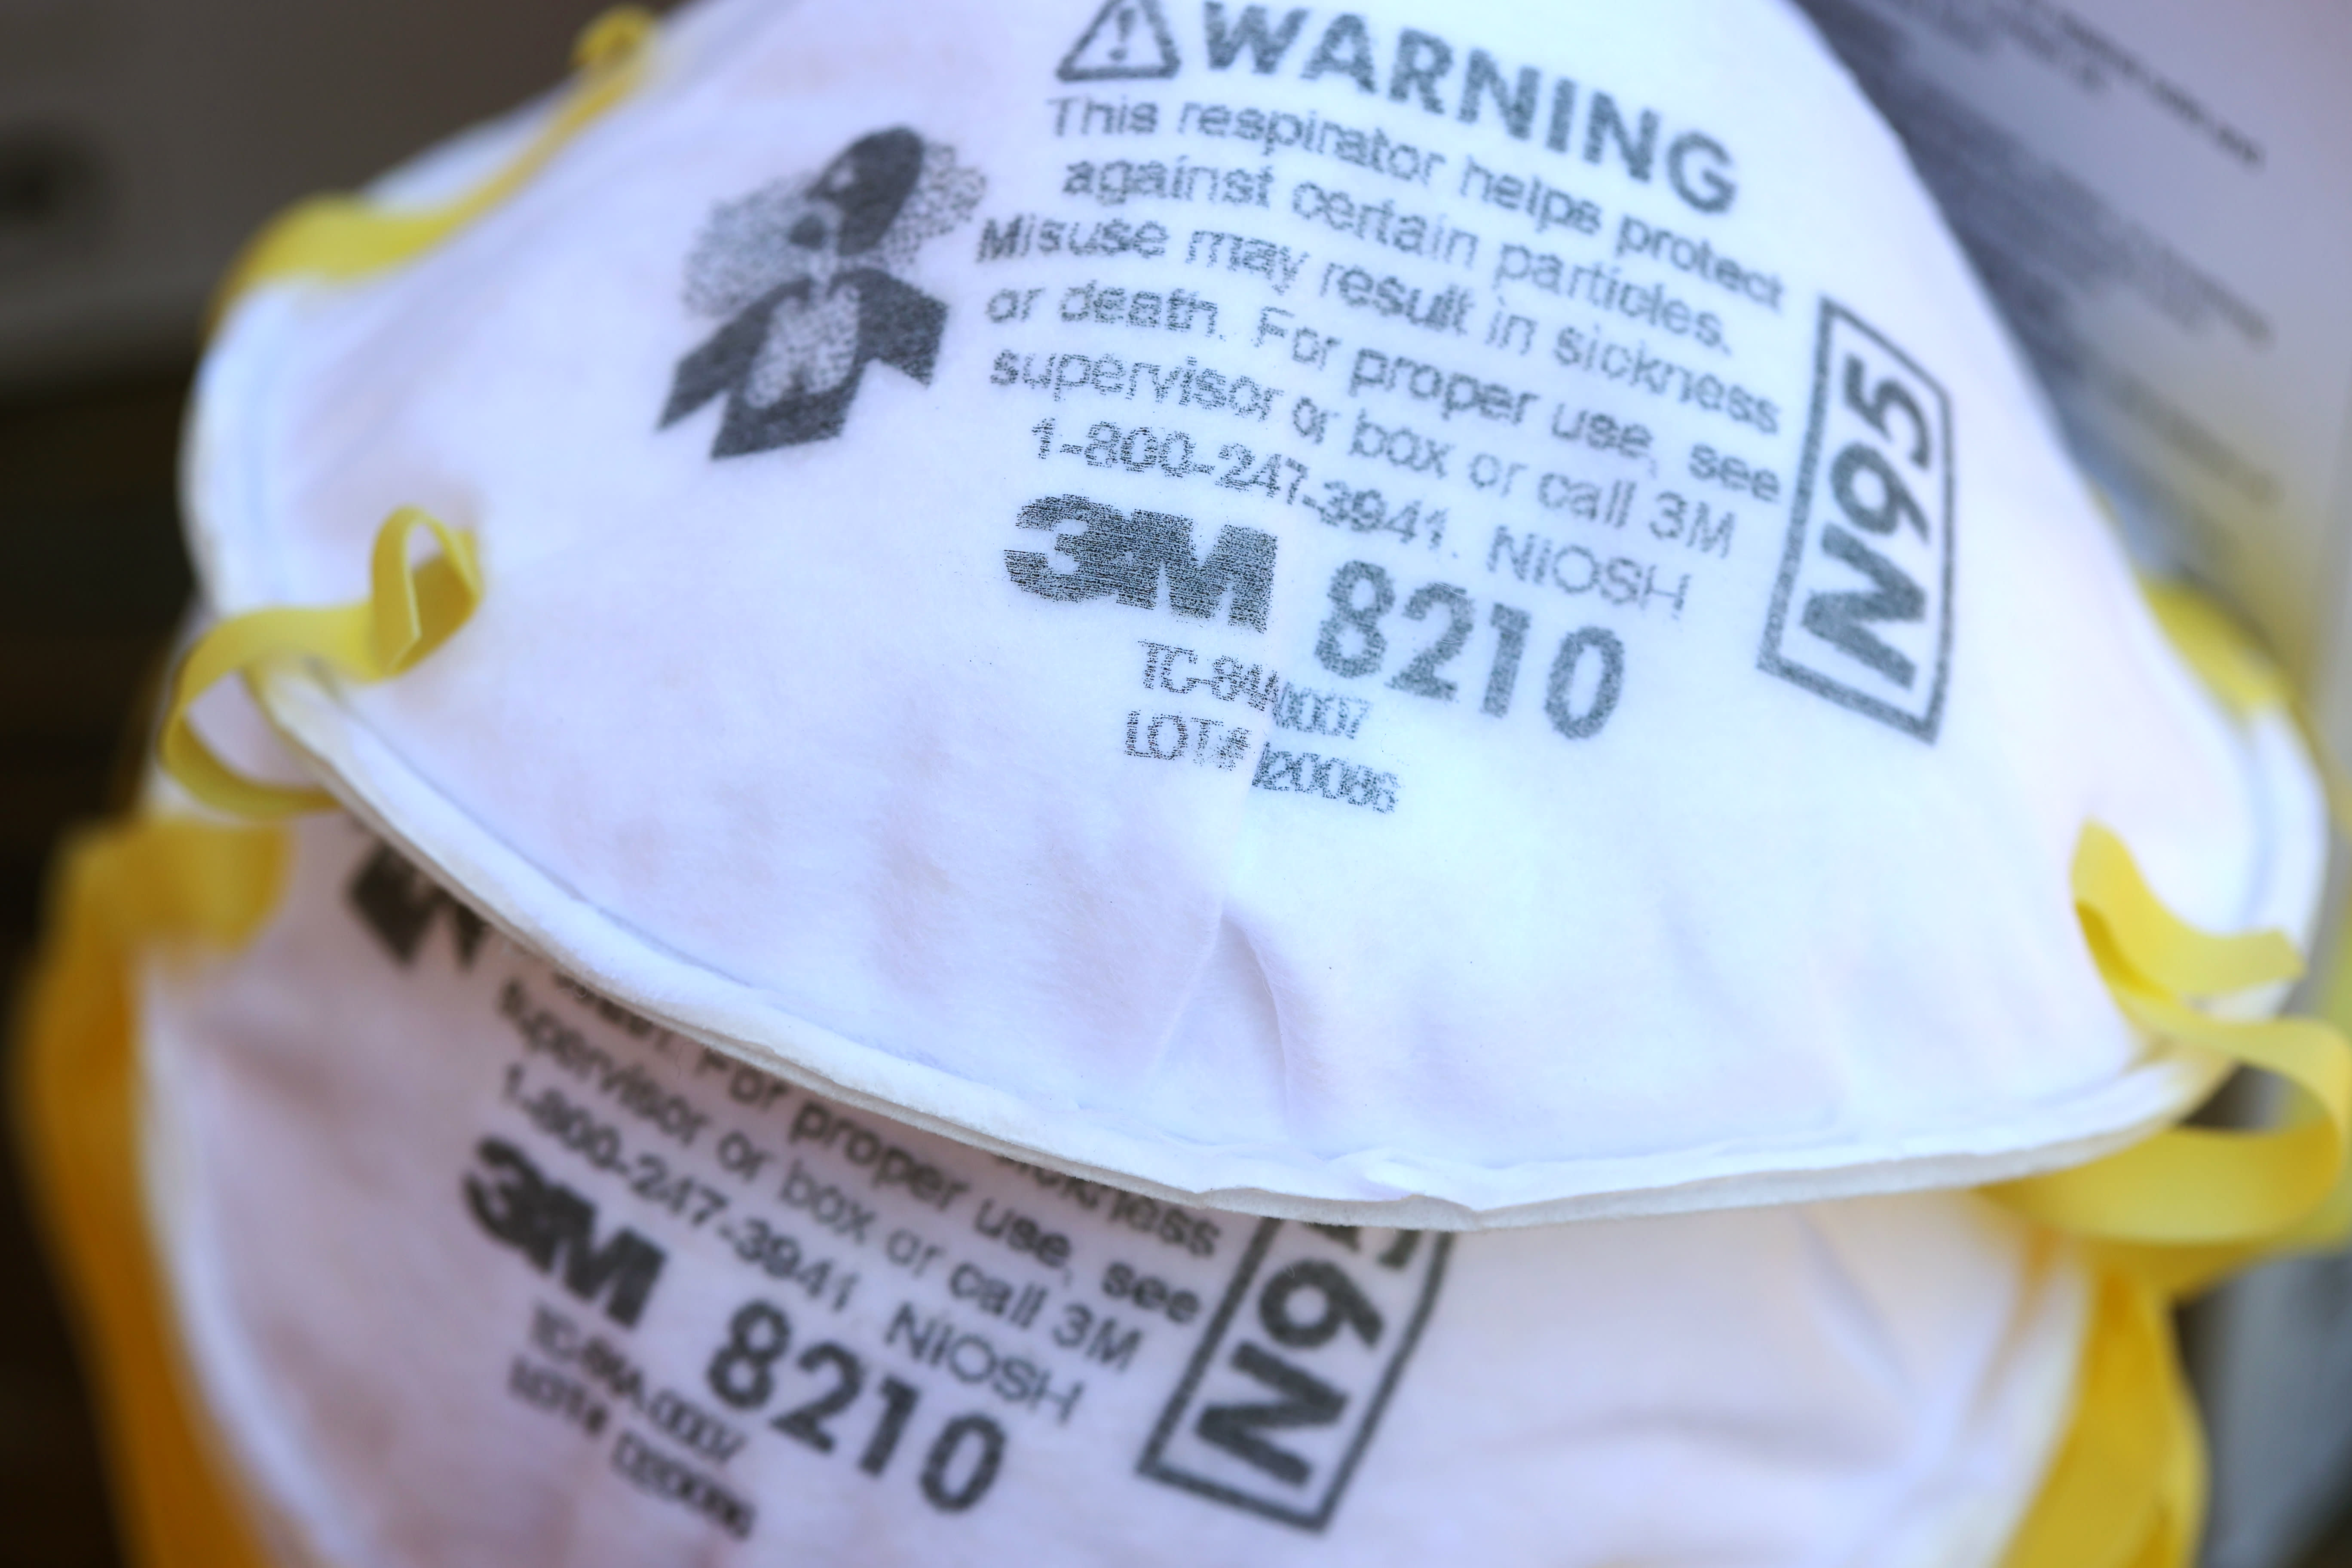 How to check if N95 respirator is real: signs of counterfeit masks